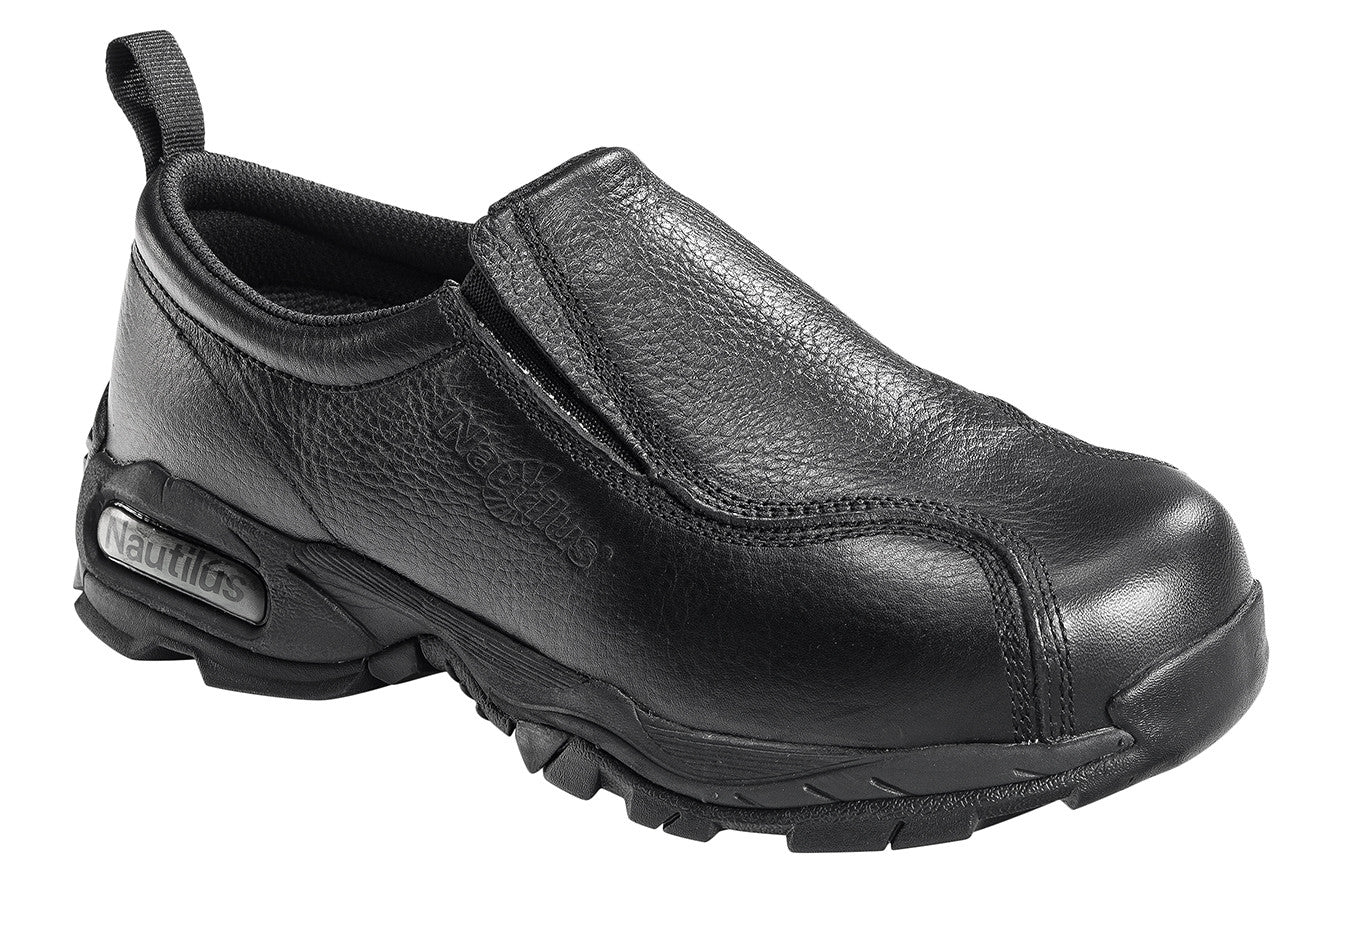 ESD No Exposed Metal Safety Toe Slip On